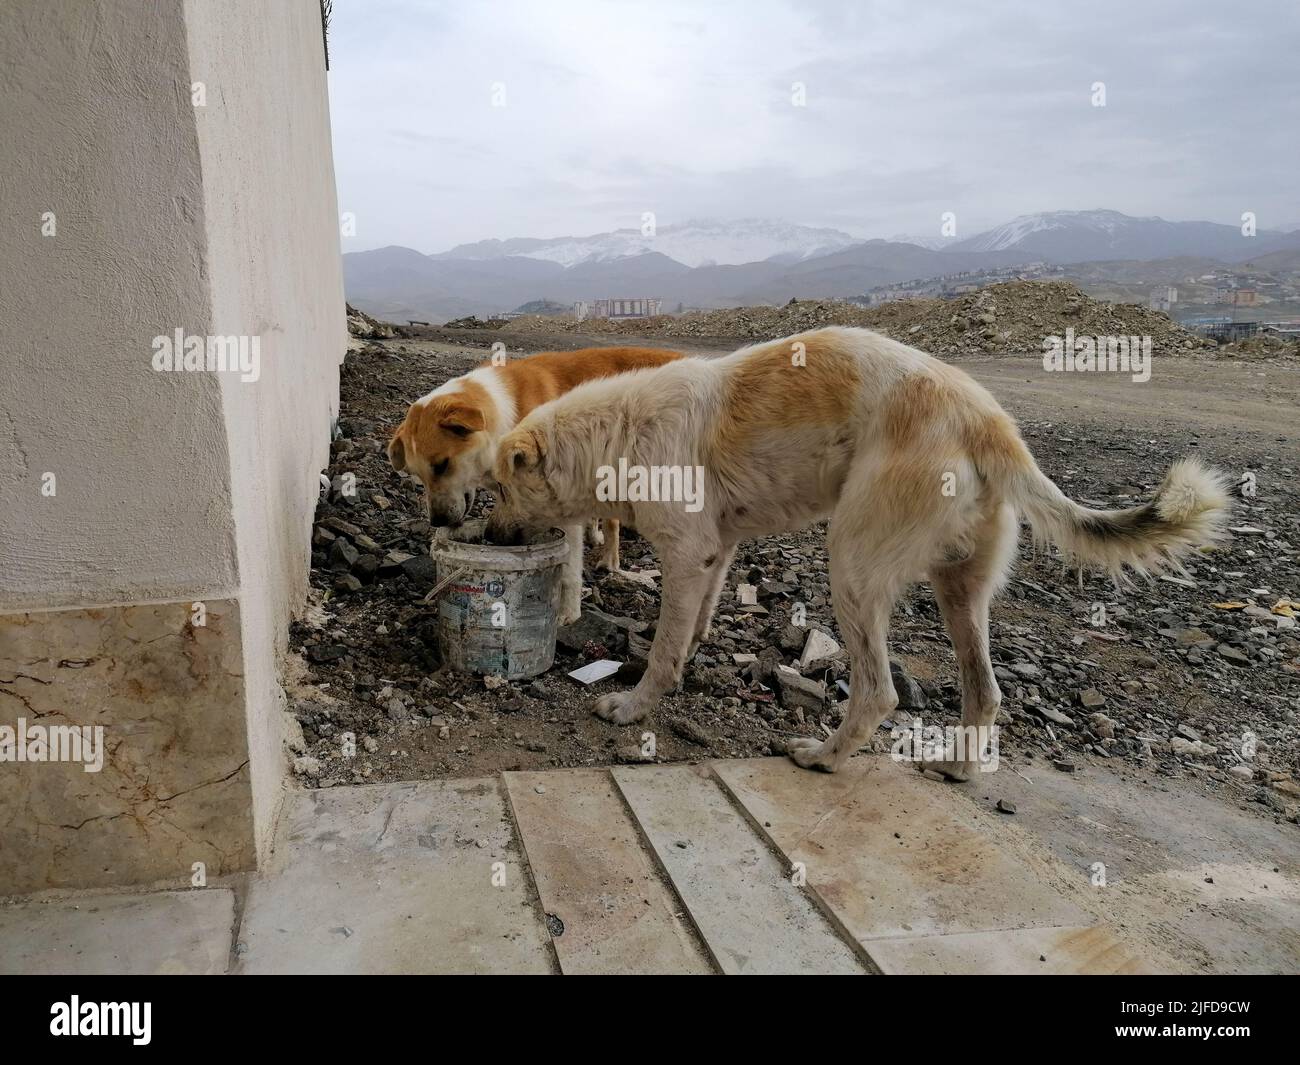 two dogs drink water from a bucket in iran Stock Photo